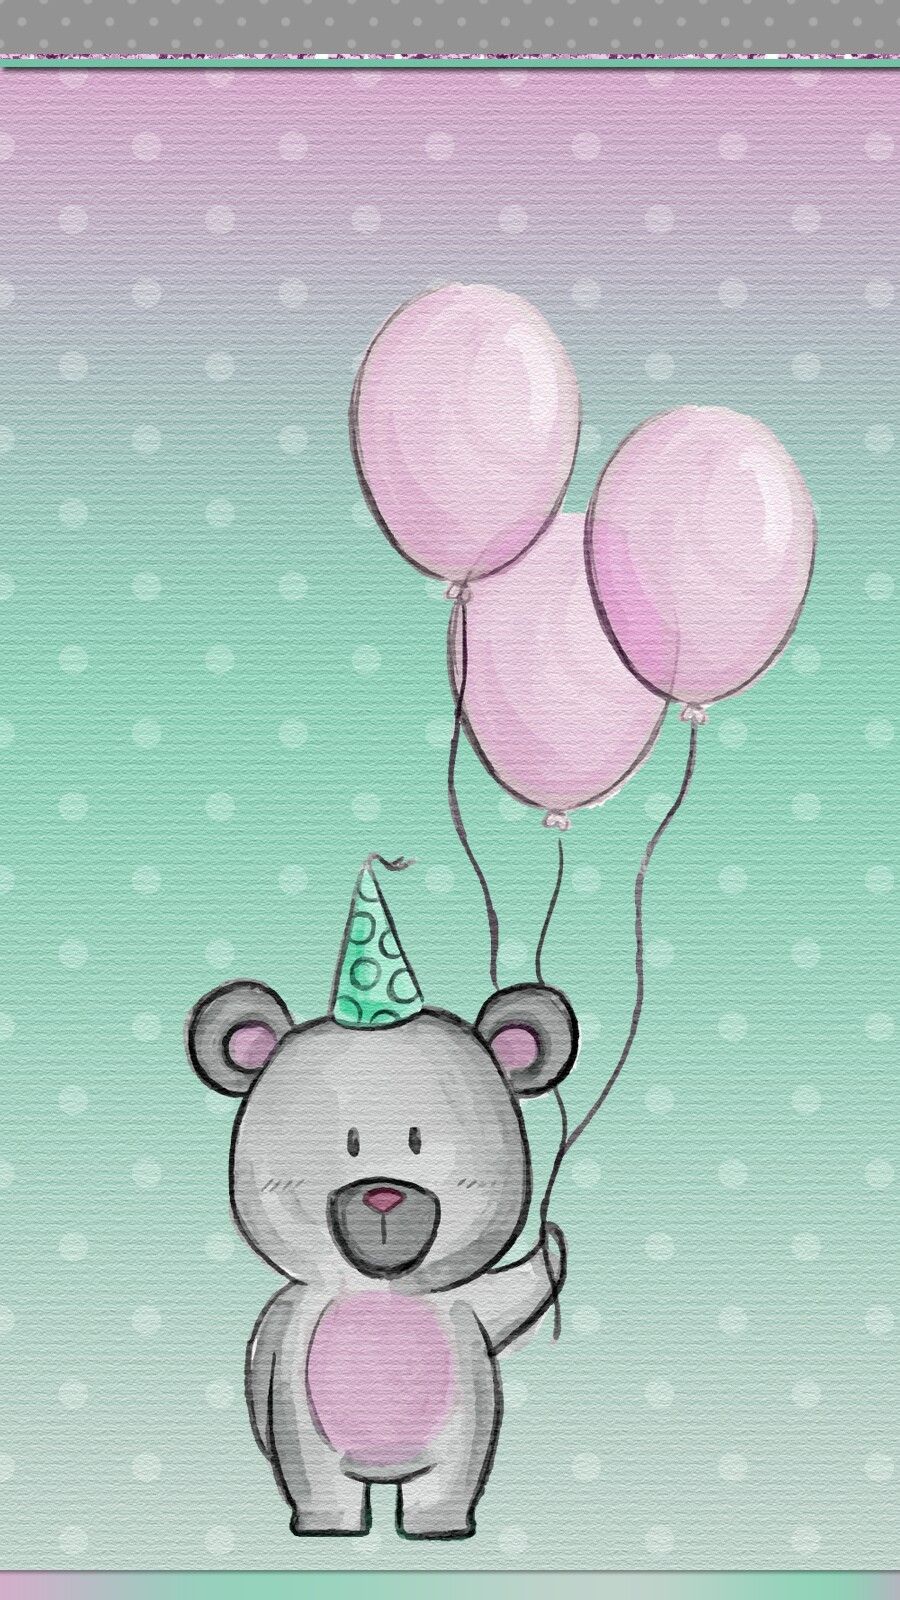 HappY birthday to me!. Birthday wallpaper, Cute wallpaper quotes, iPhone wallpaper